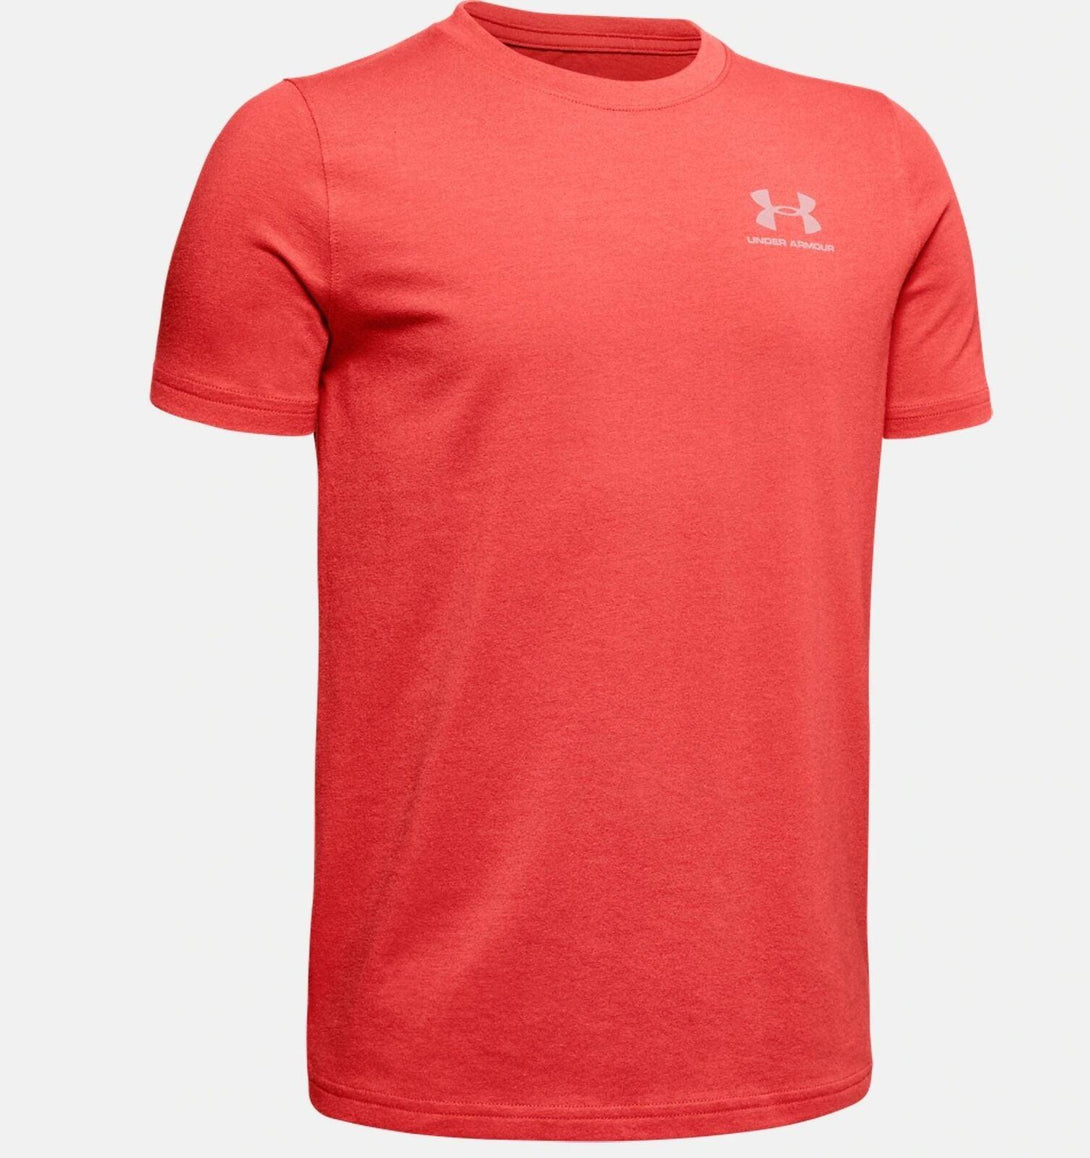 Rugby Heaven Under Armour EU Cotton Short Sleeve T-Shirt Kids - www.rugby-heaven.co.uk